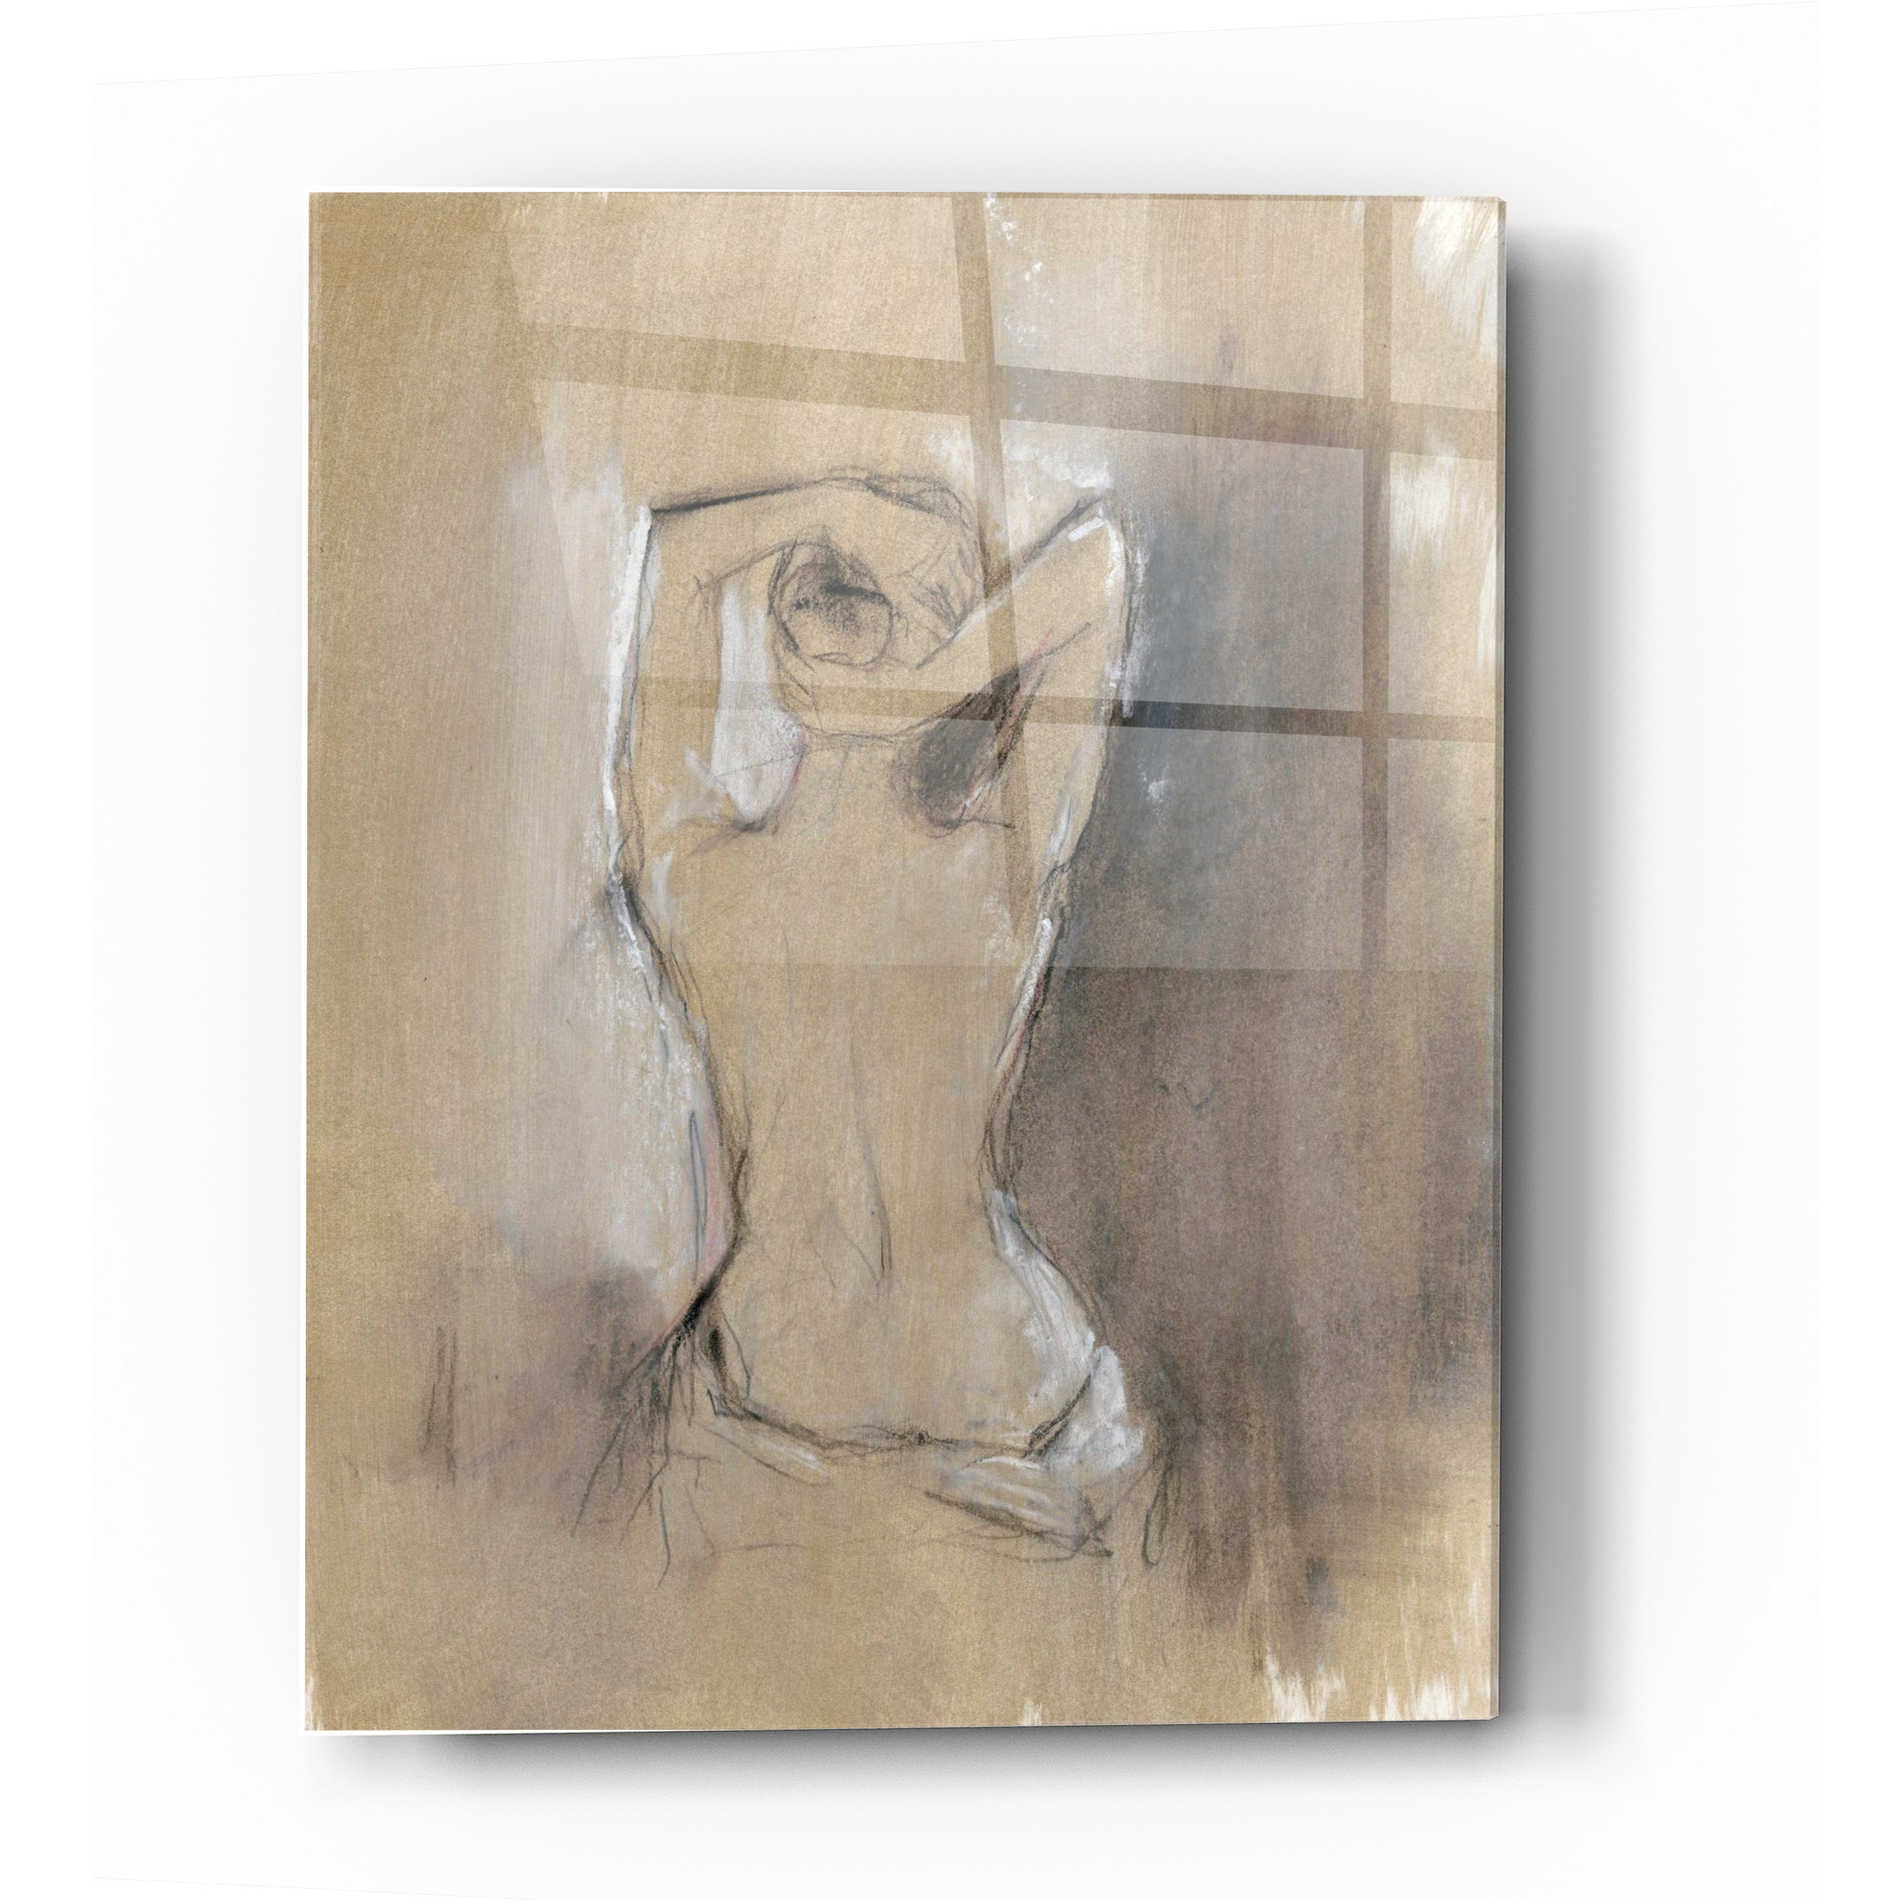 Epic Art 'Contemporary Draped Figure I' by Ethan Harper Acrylic Glass Wall Art,12x16